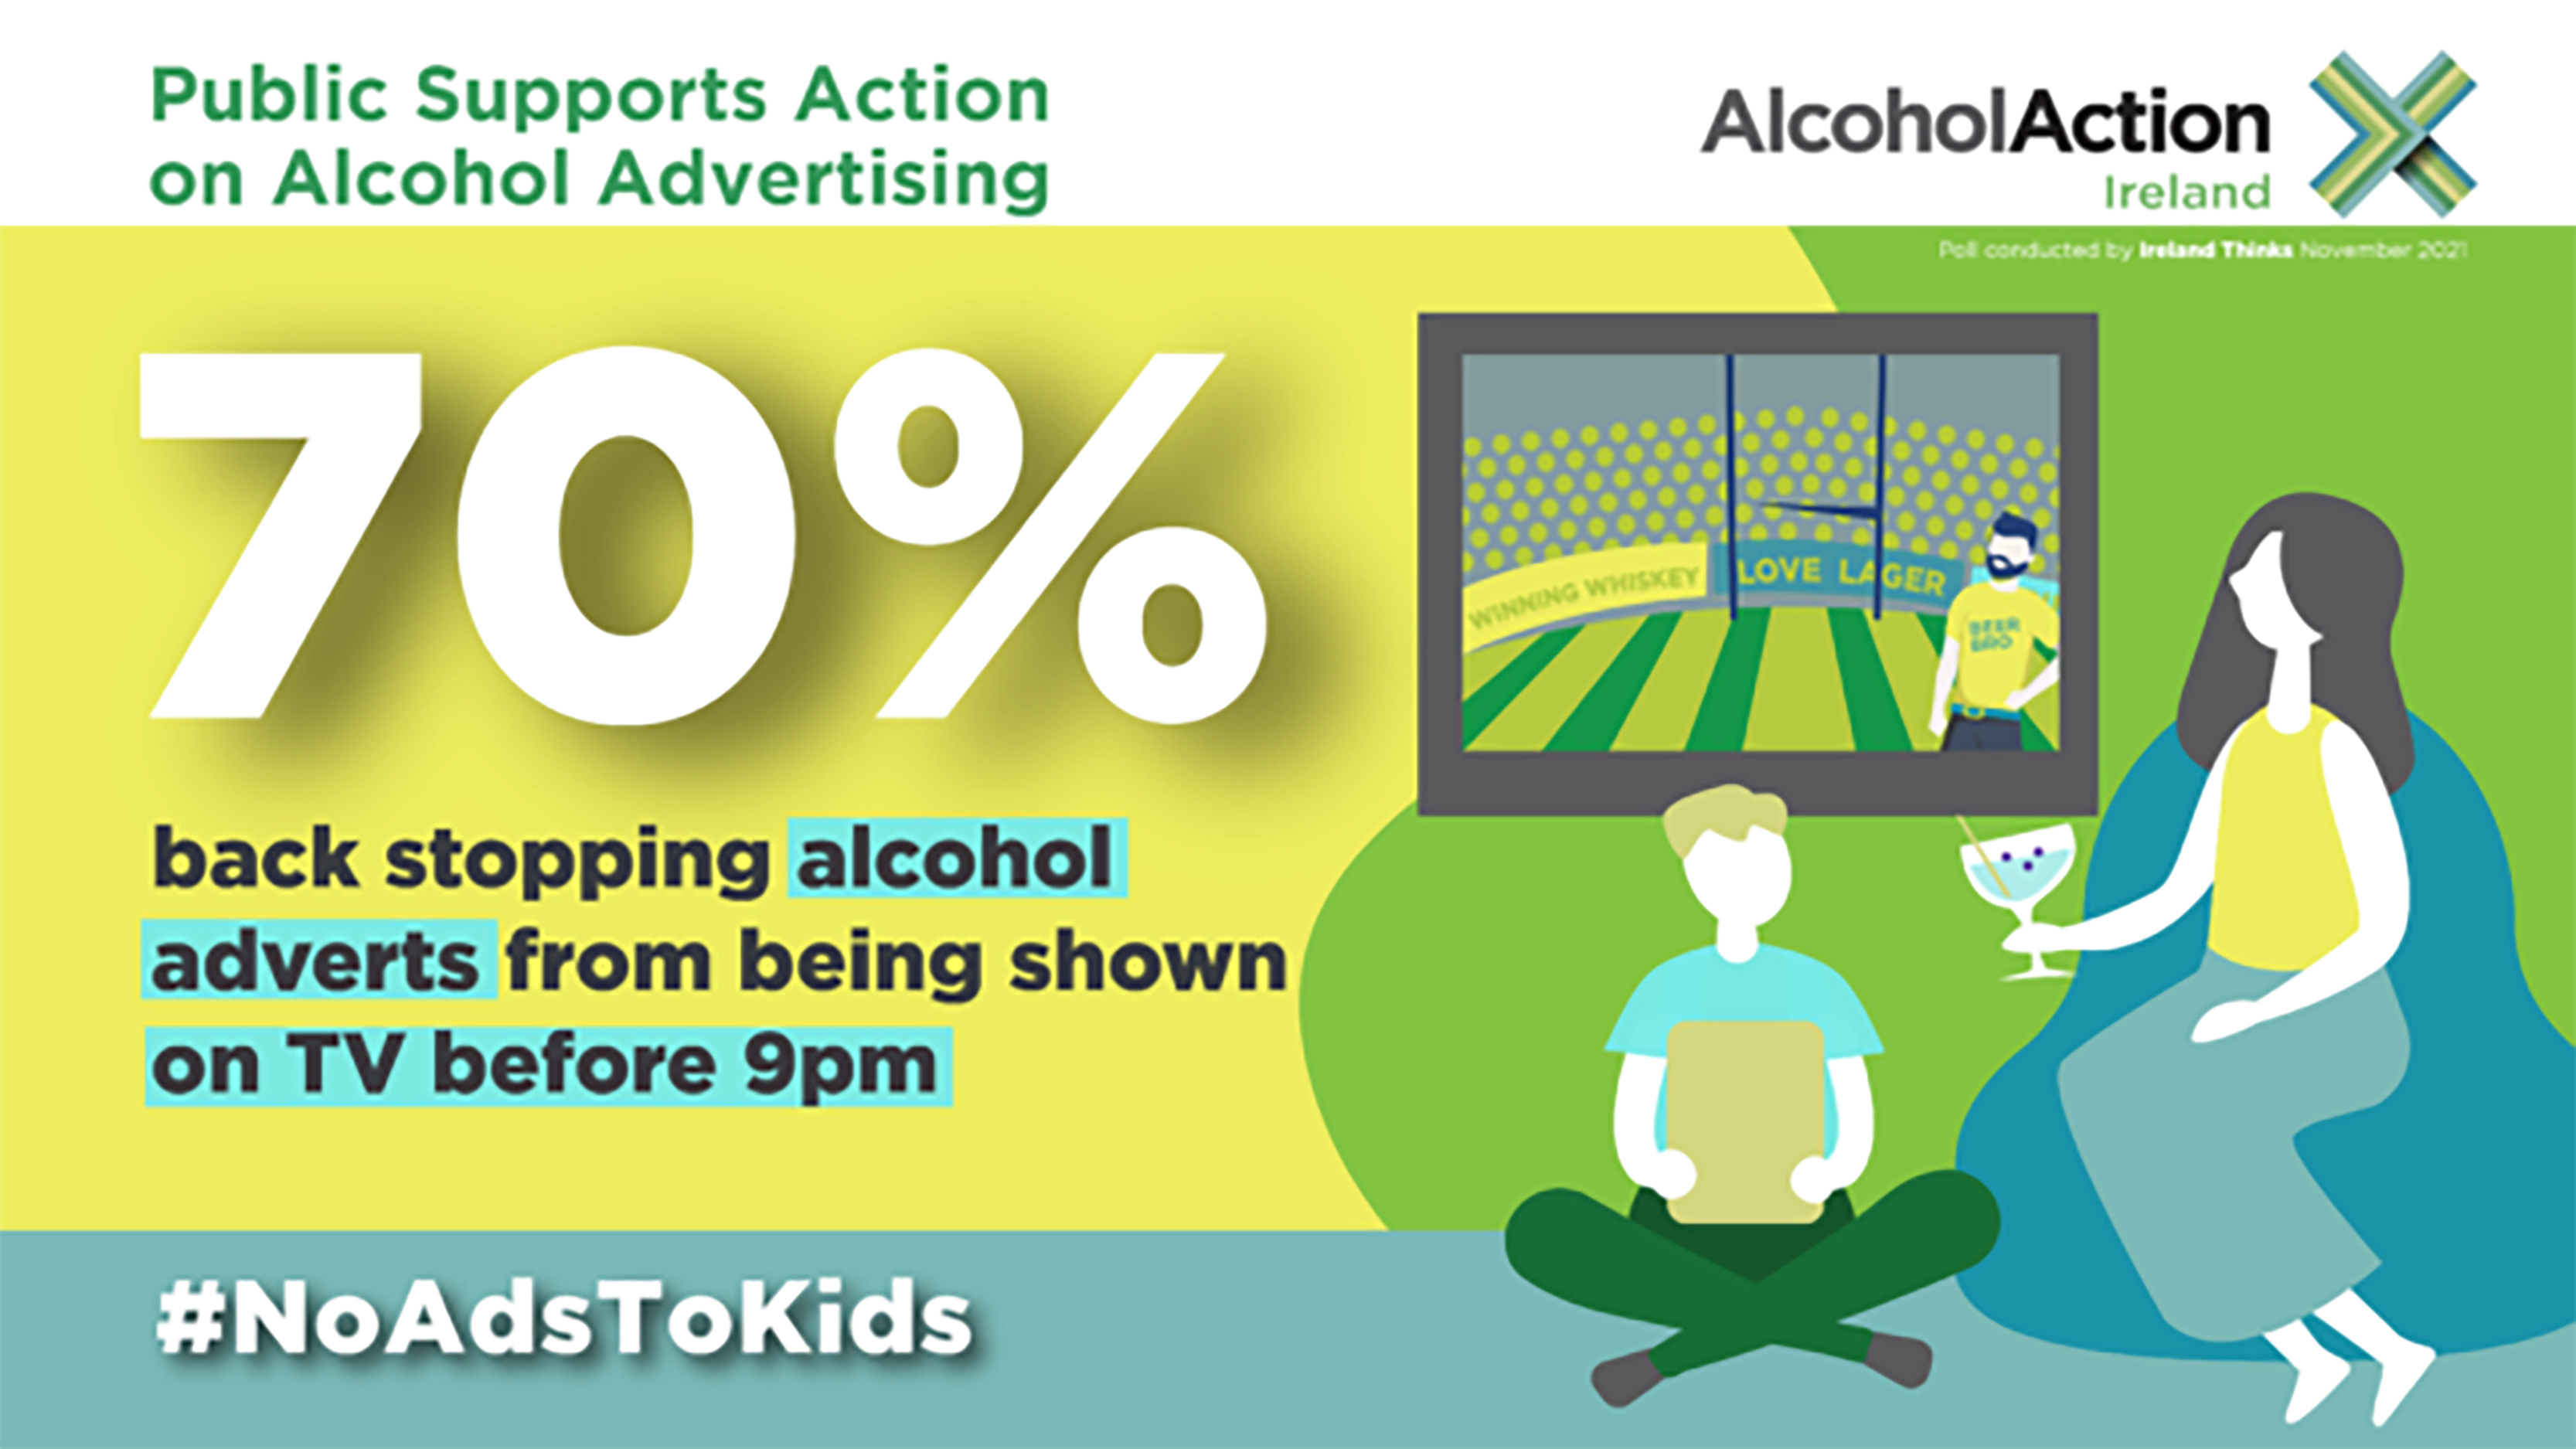 Public polling on the perception of alcohol marketing targeting children